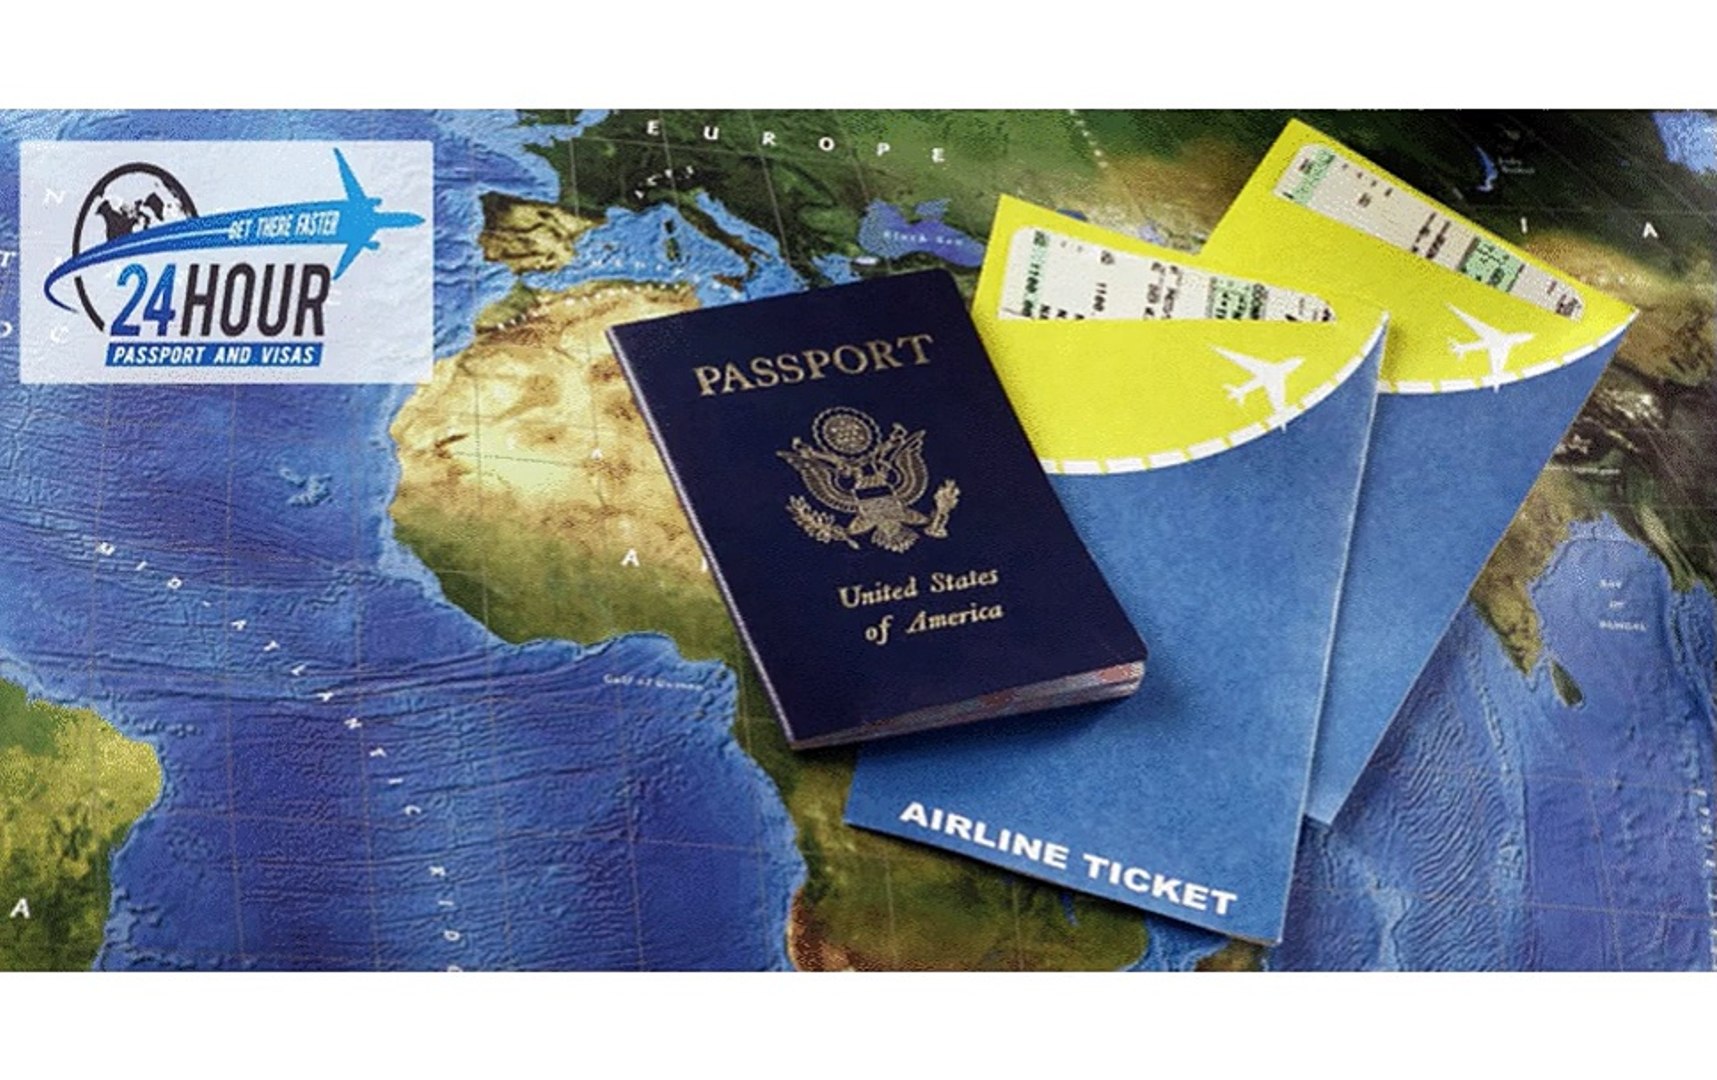 How to Get Quick Passport and Visa in USA?